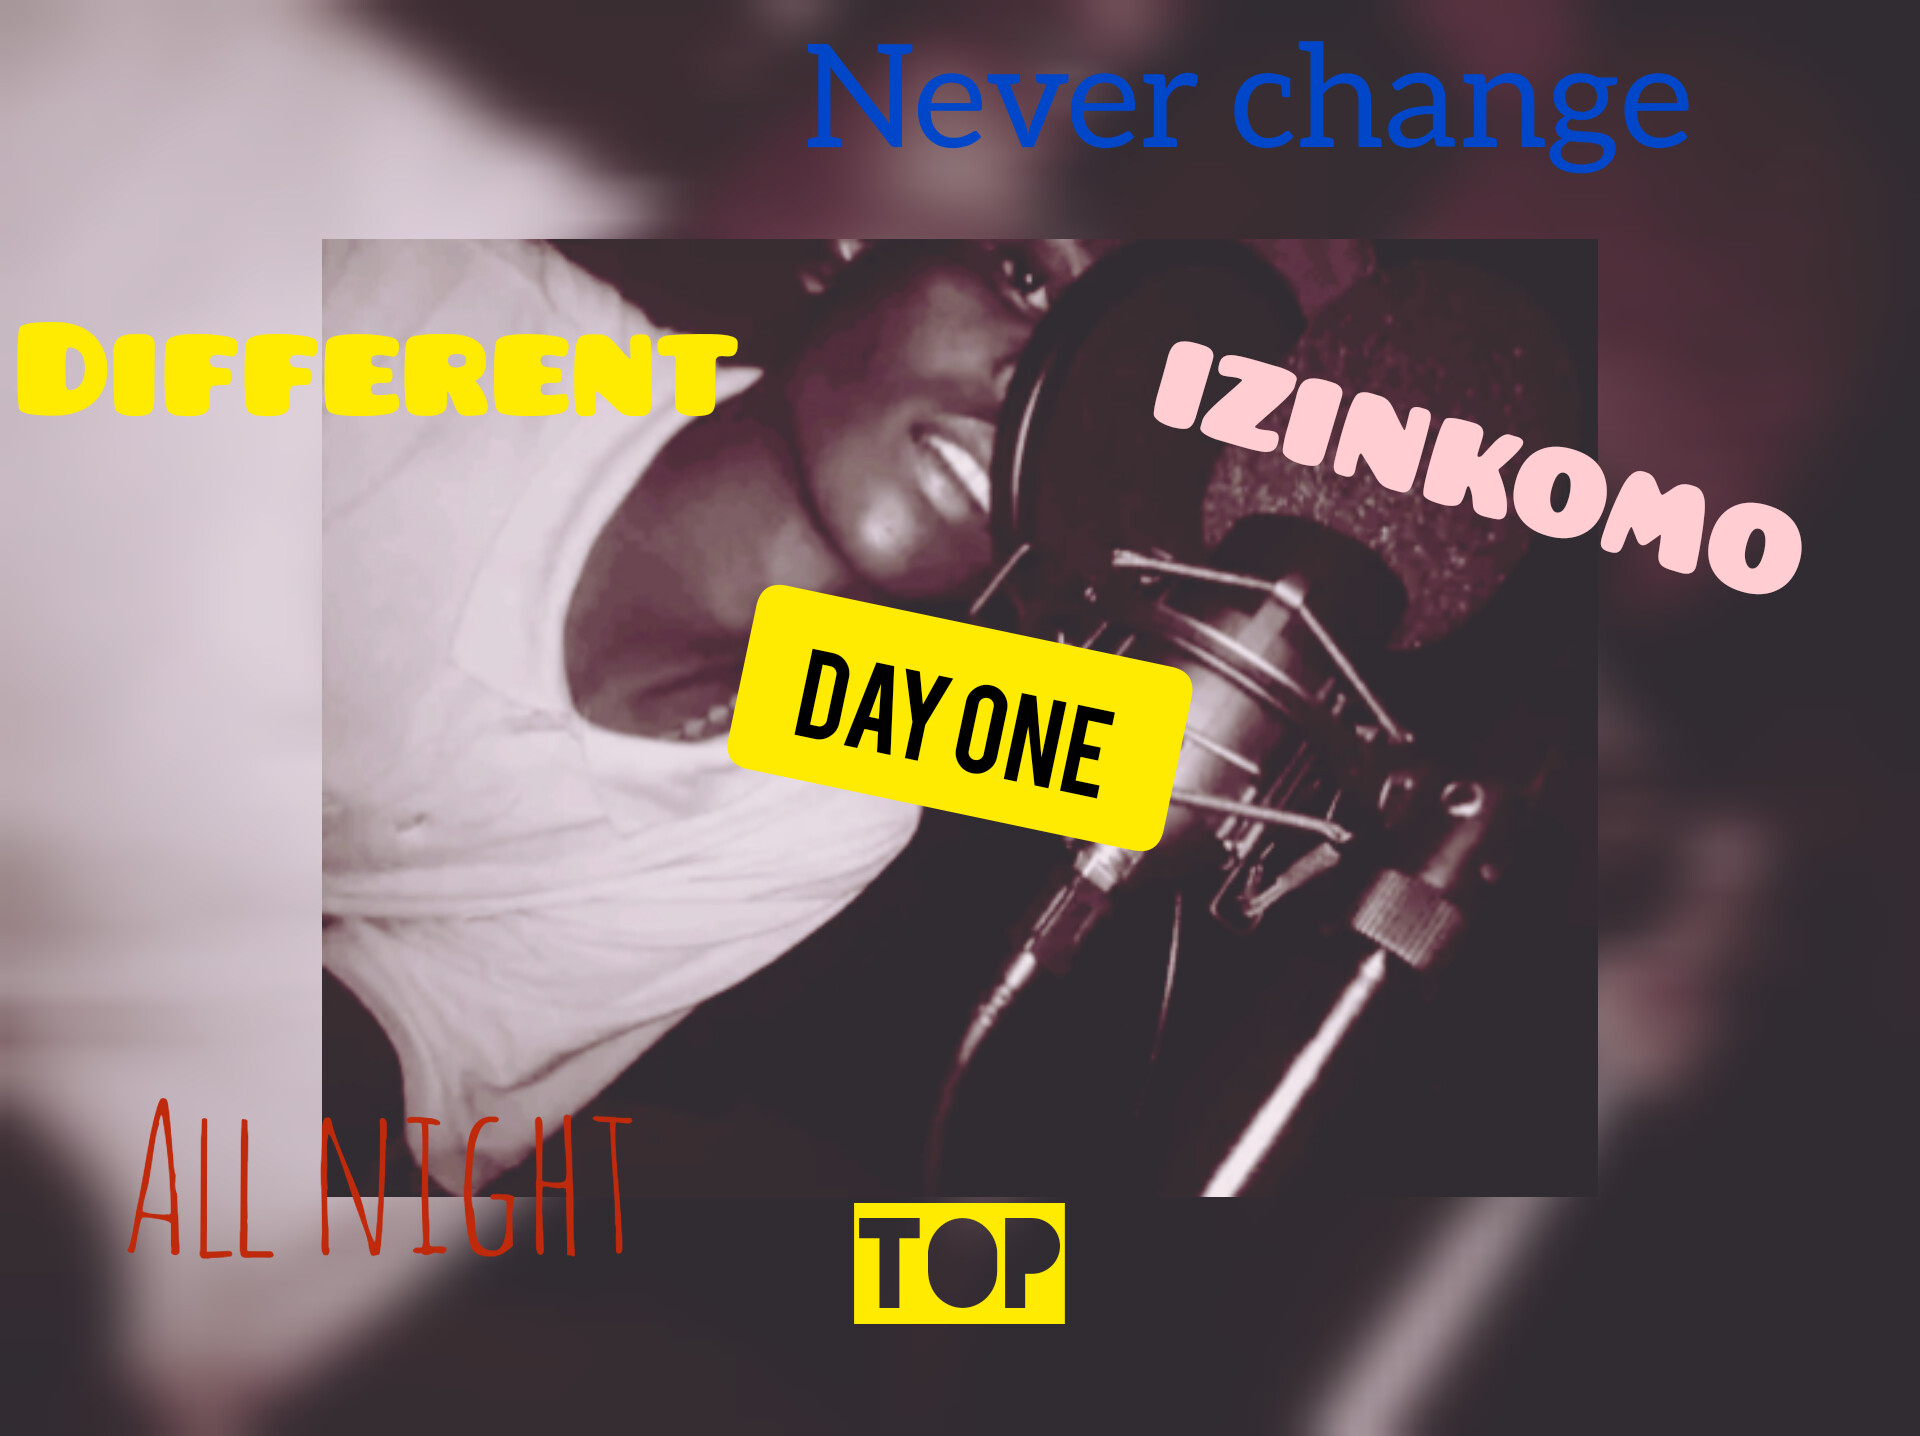 DAY ONE_Never change - Sy-syza